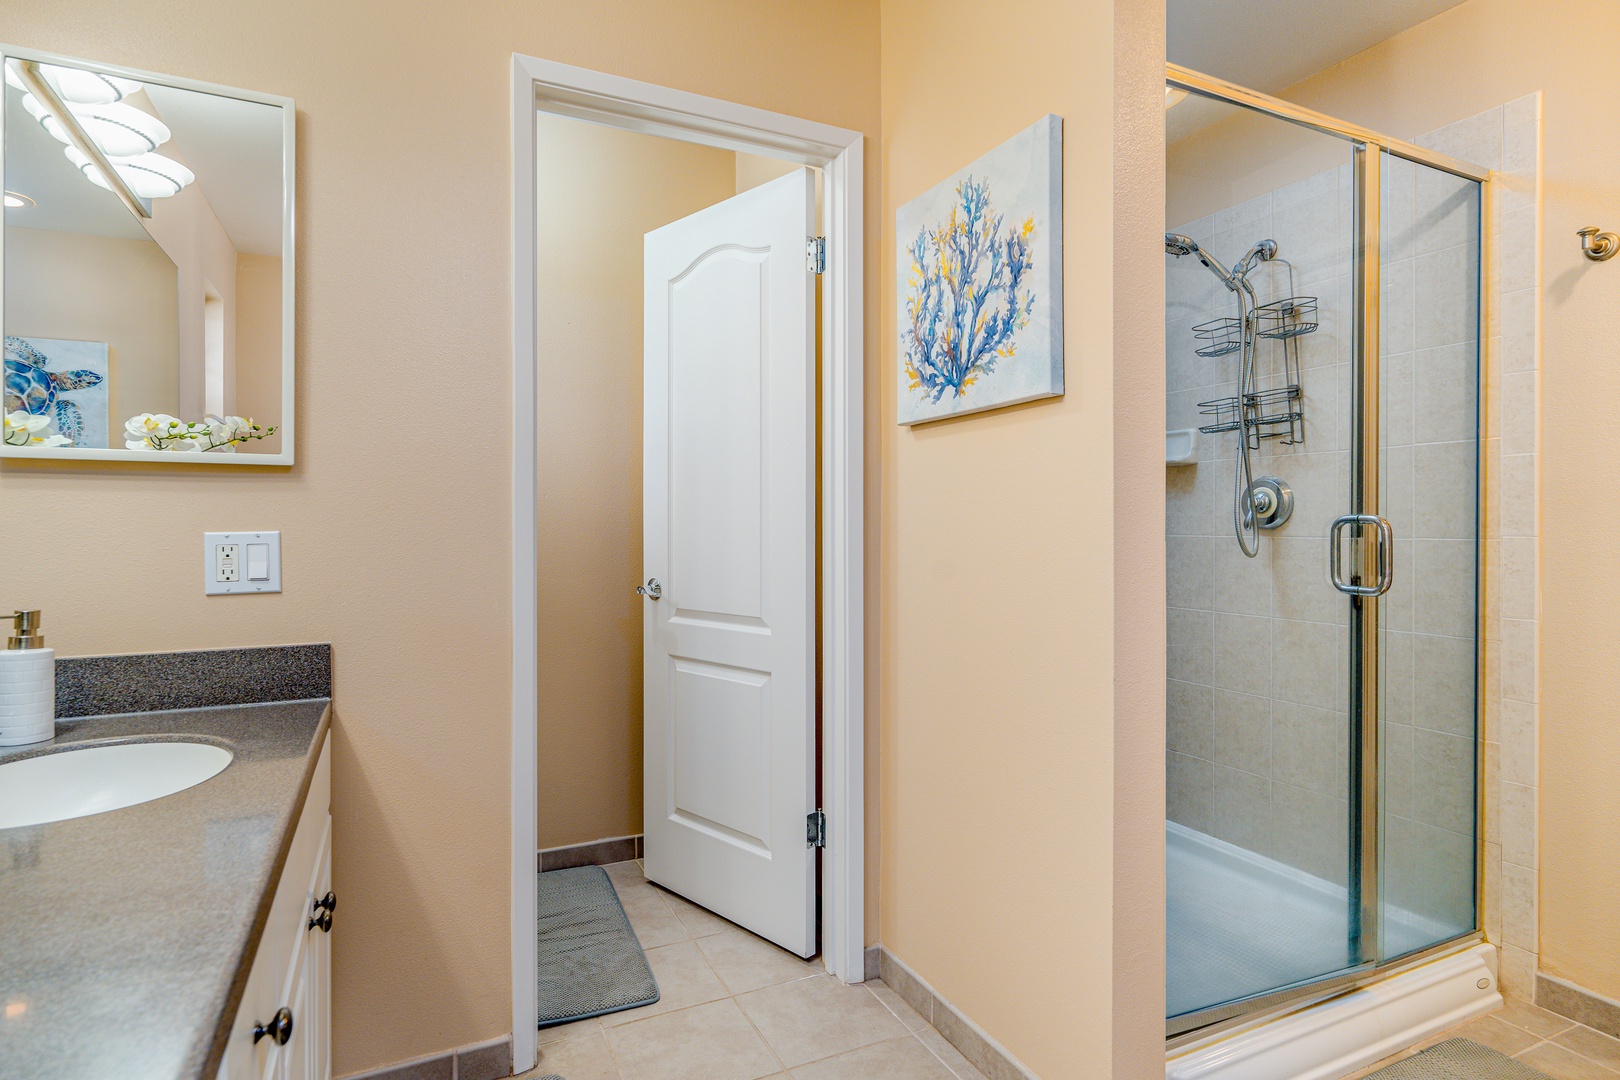 Kapolei Vacation Rentals, Ko Olina Kai 1081C - The guest bathroom with a walk-in shower.